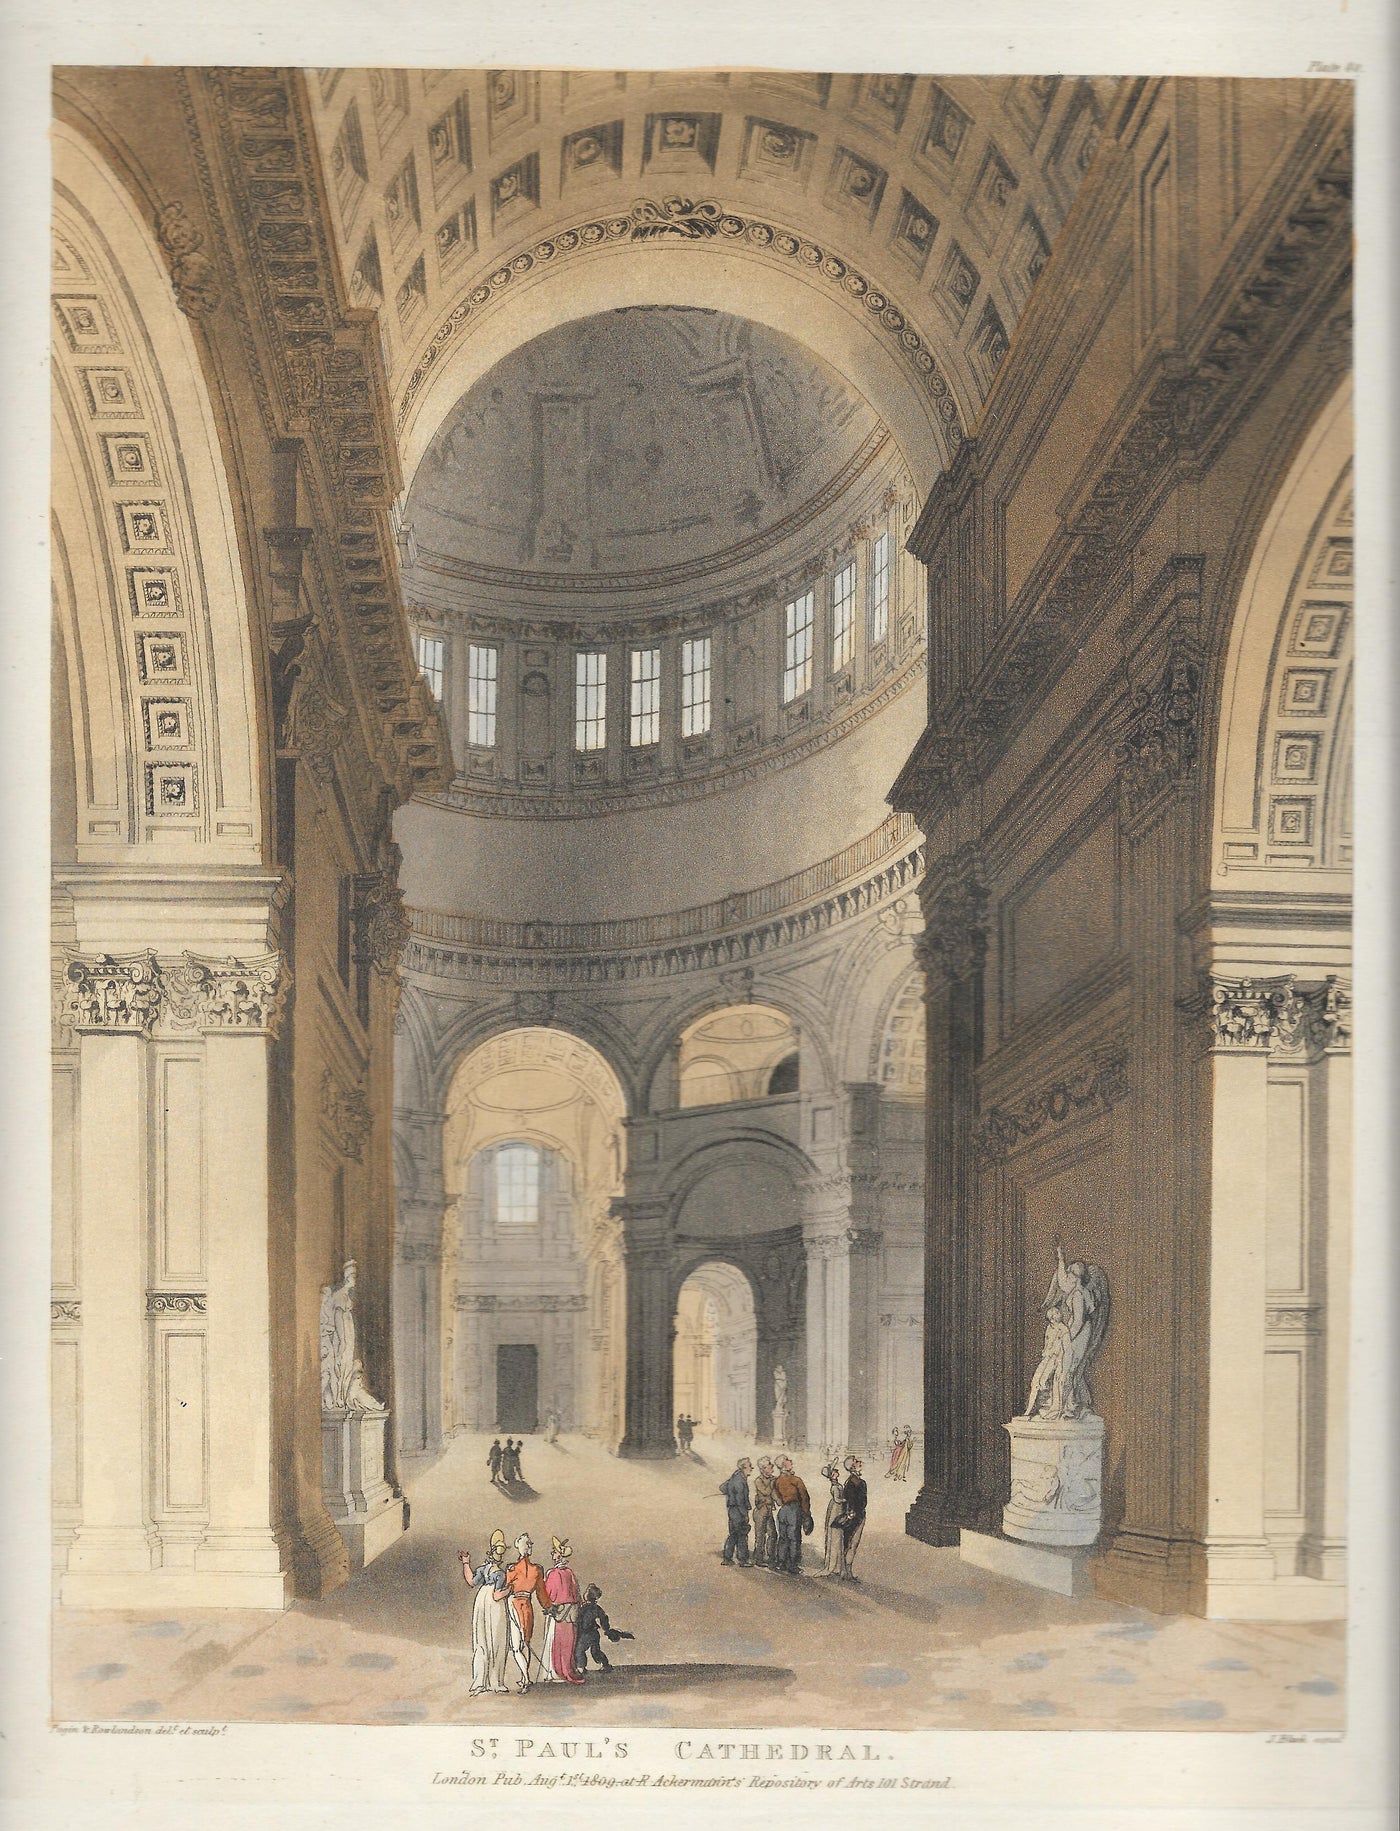 St. Paul's Cathedral London antique print 1809.